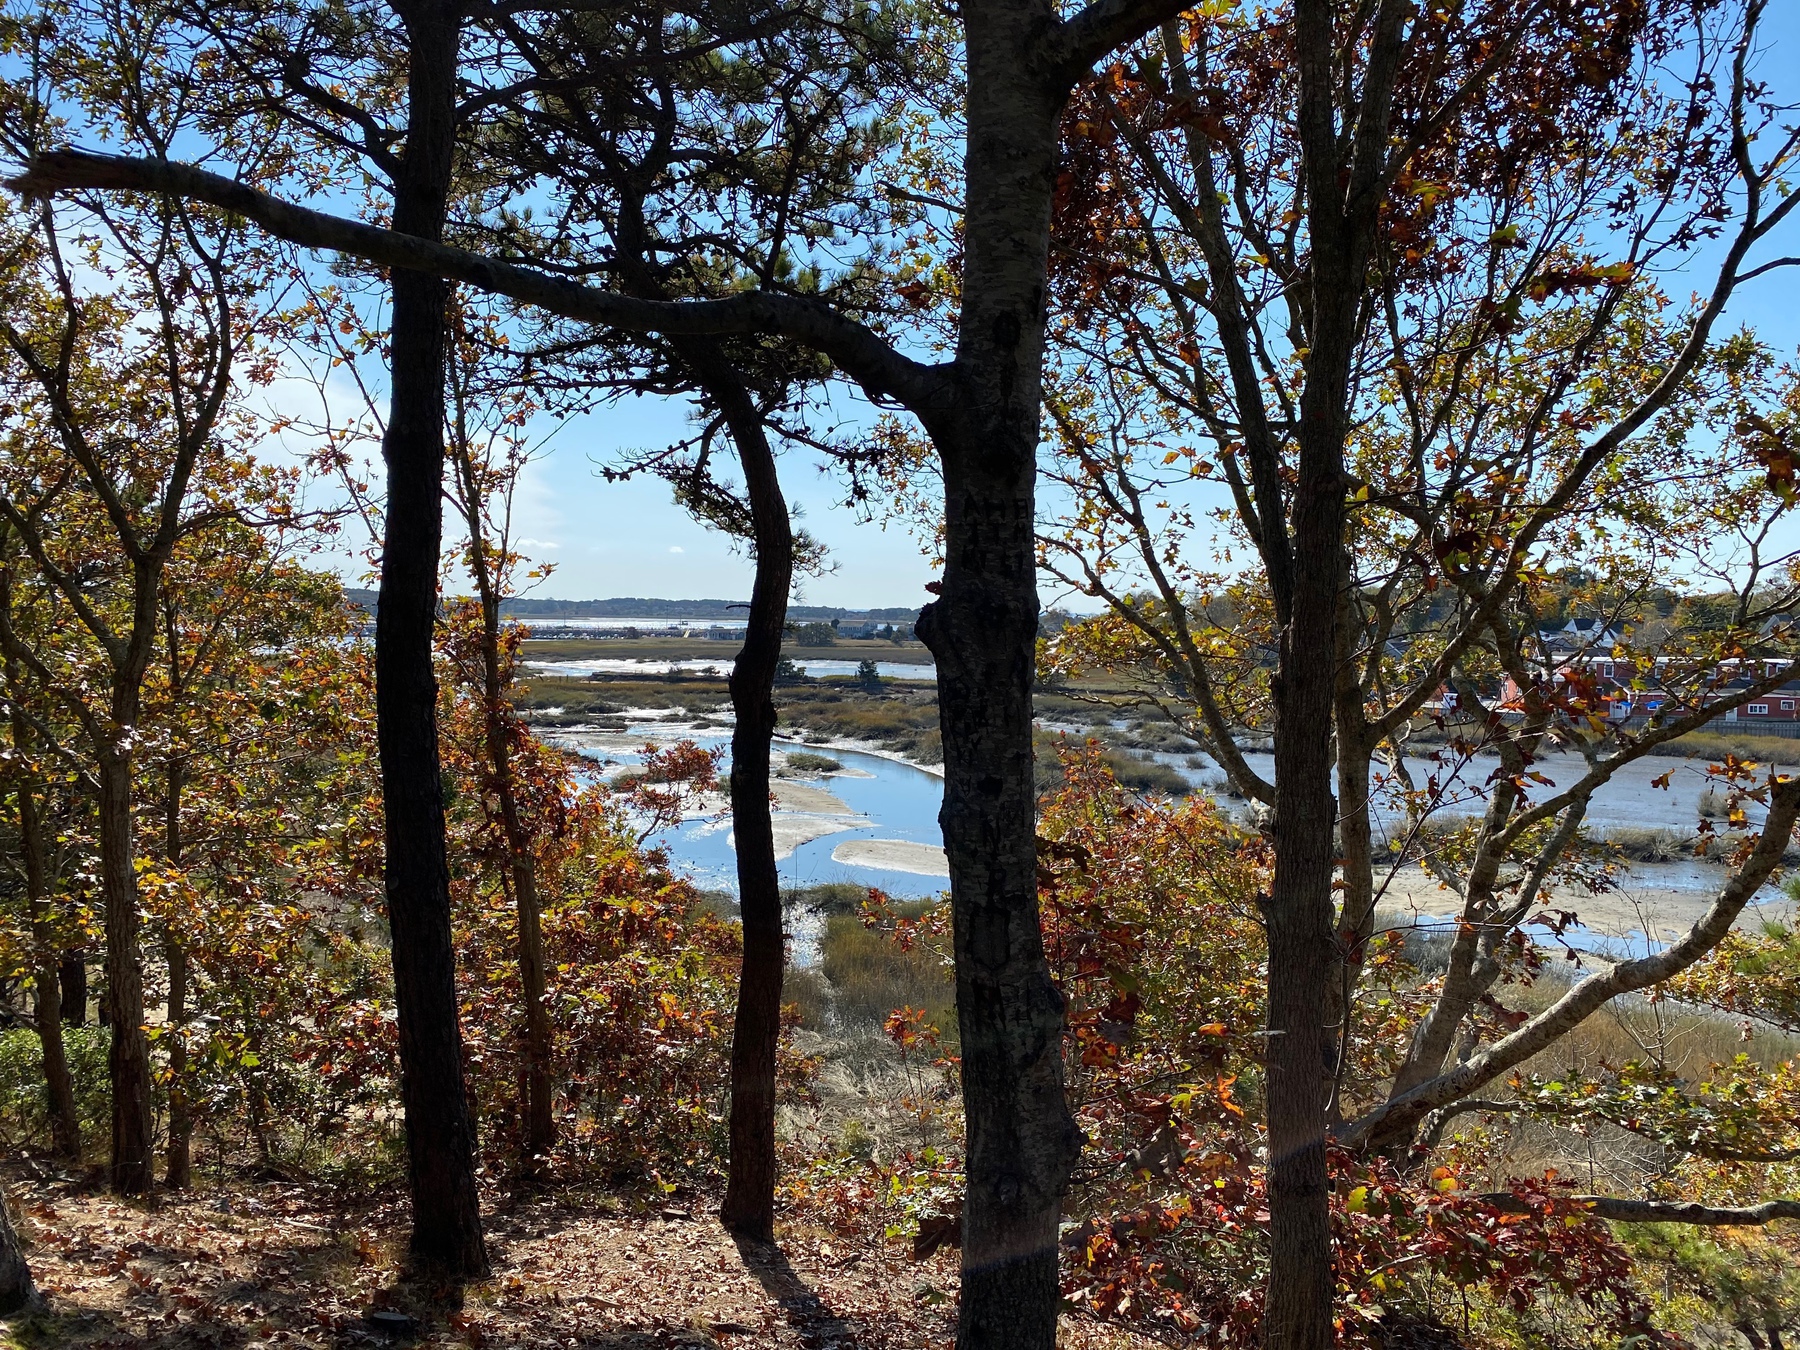 View of a tidal creek from a small hill, with tree trunks in the foreground.